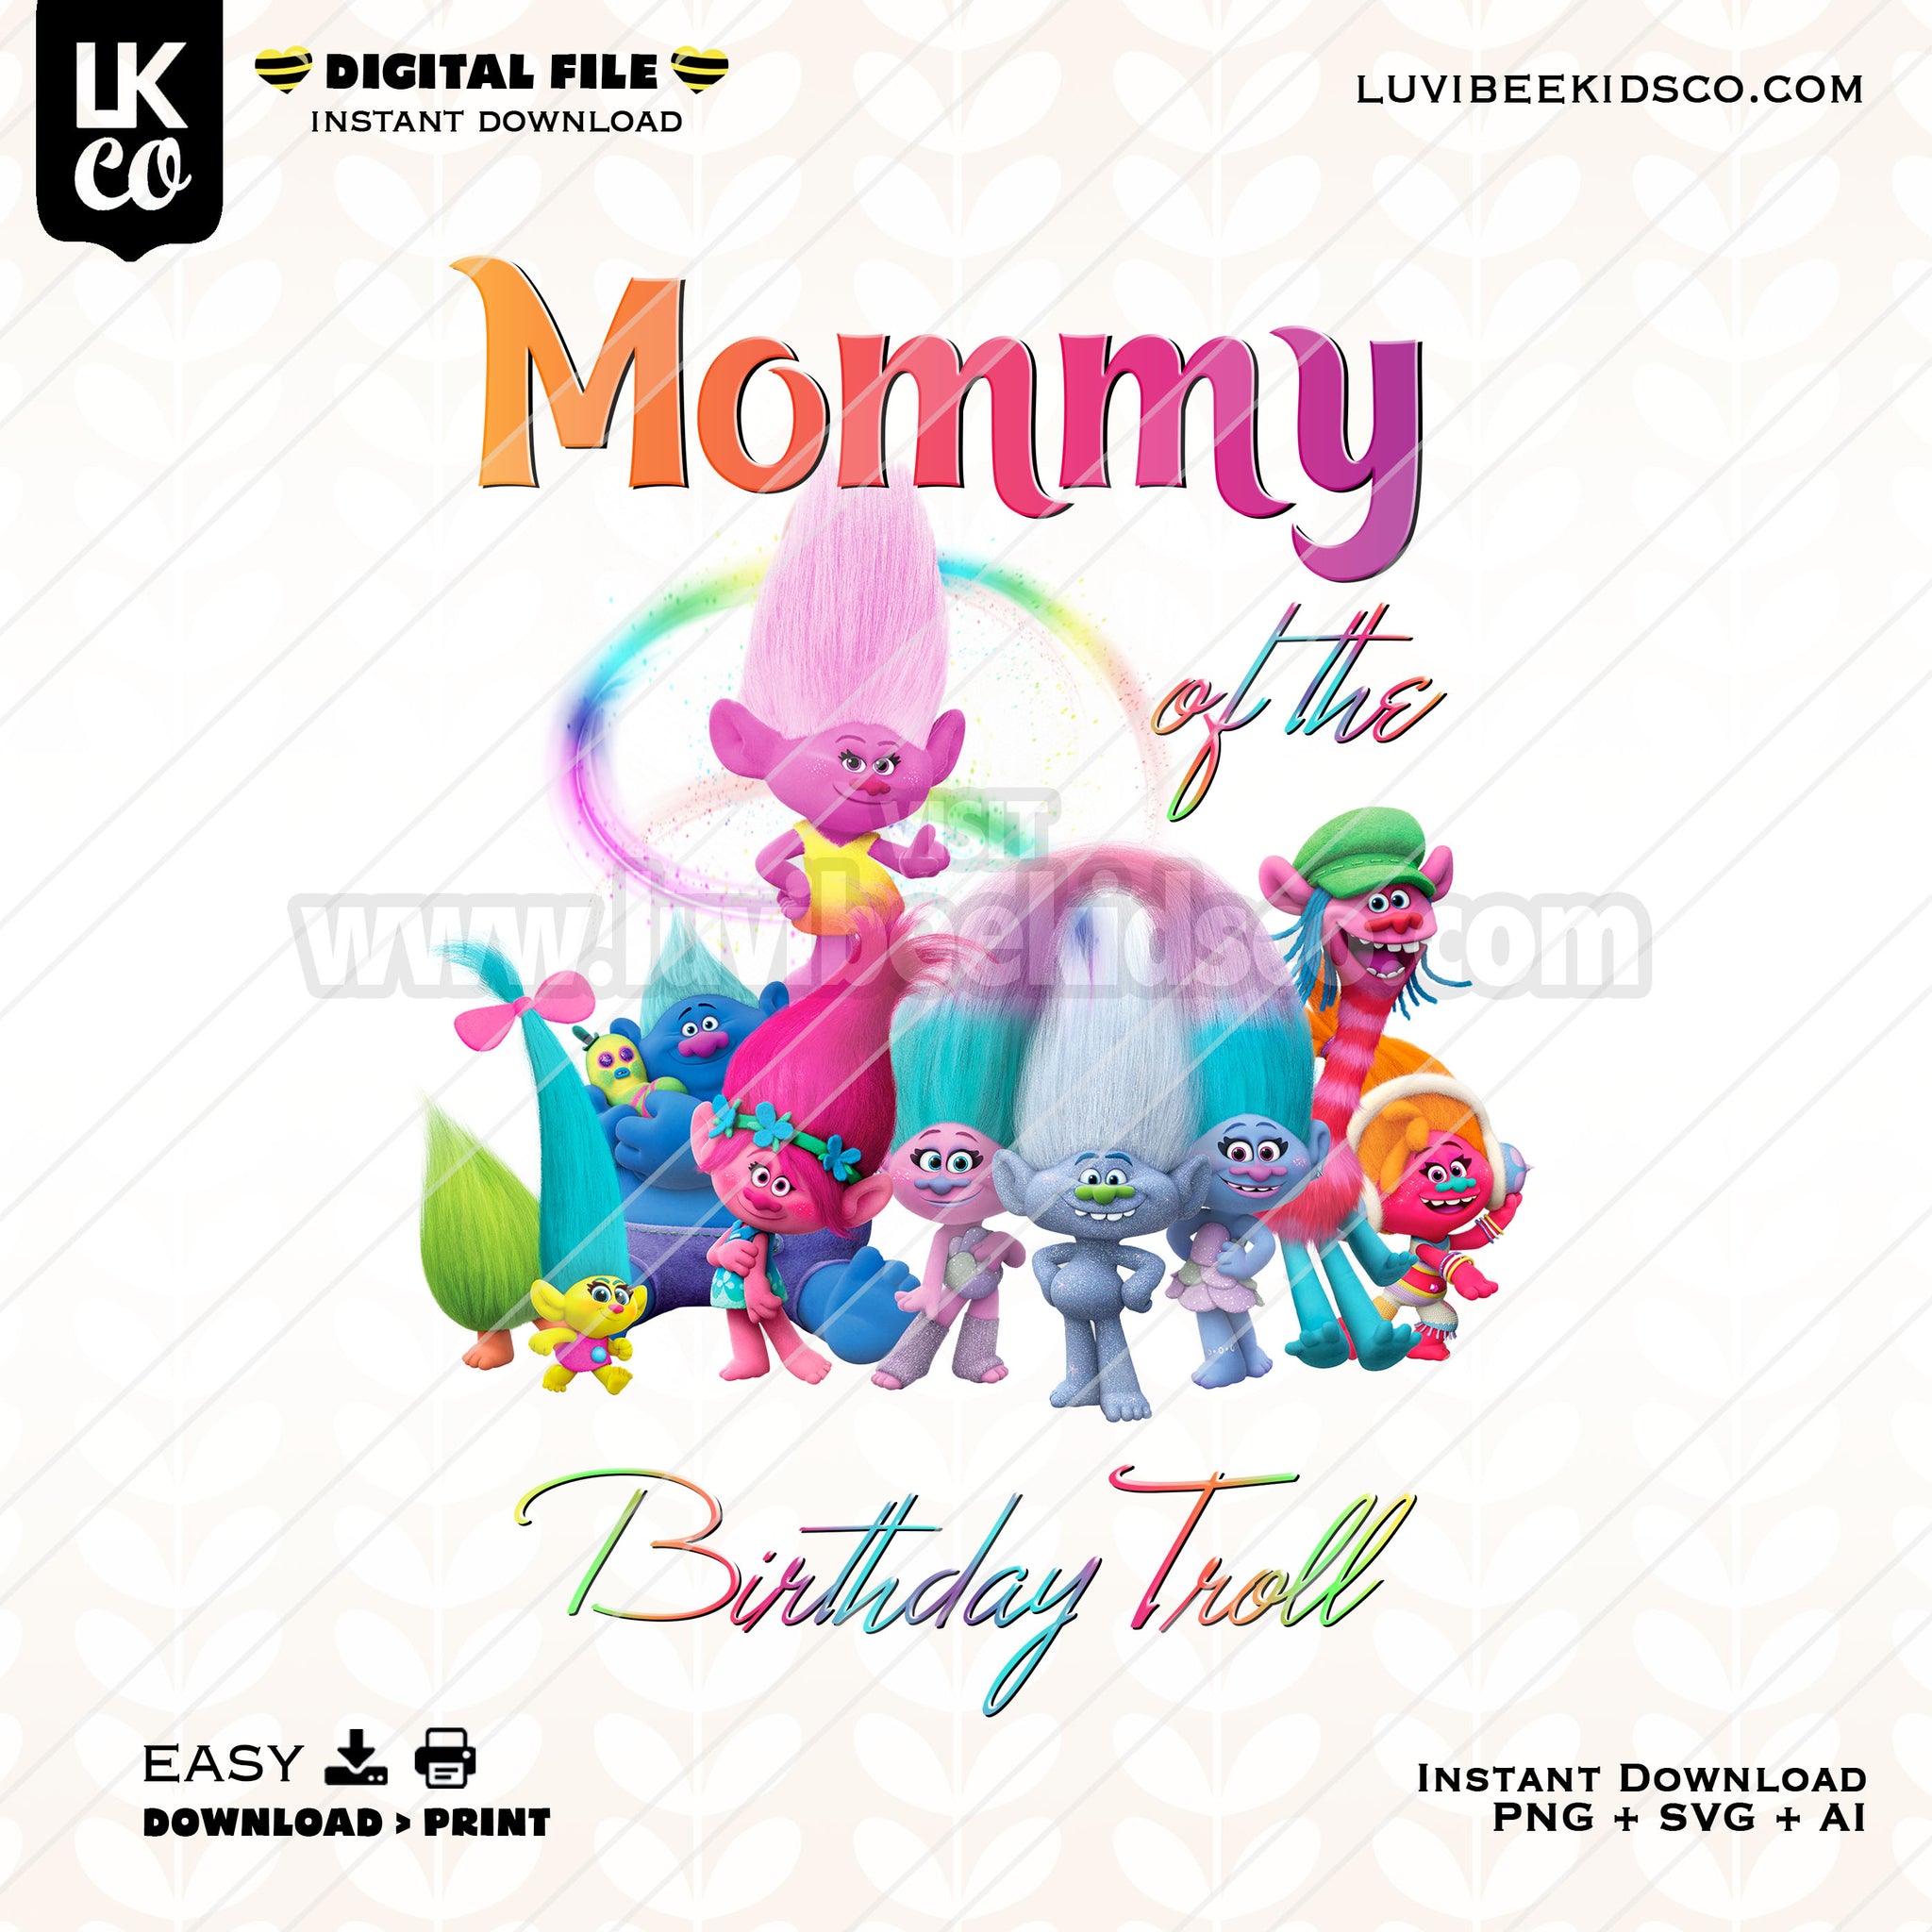 Trolls Inspired Logo for Birthdays, Events, Crafts, and T-Shirts - Rainbow Mommy of the Birthday Troll - Instant Download